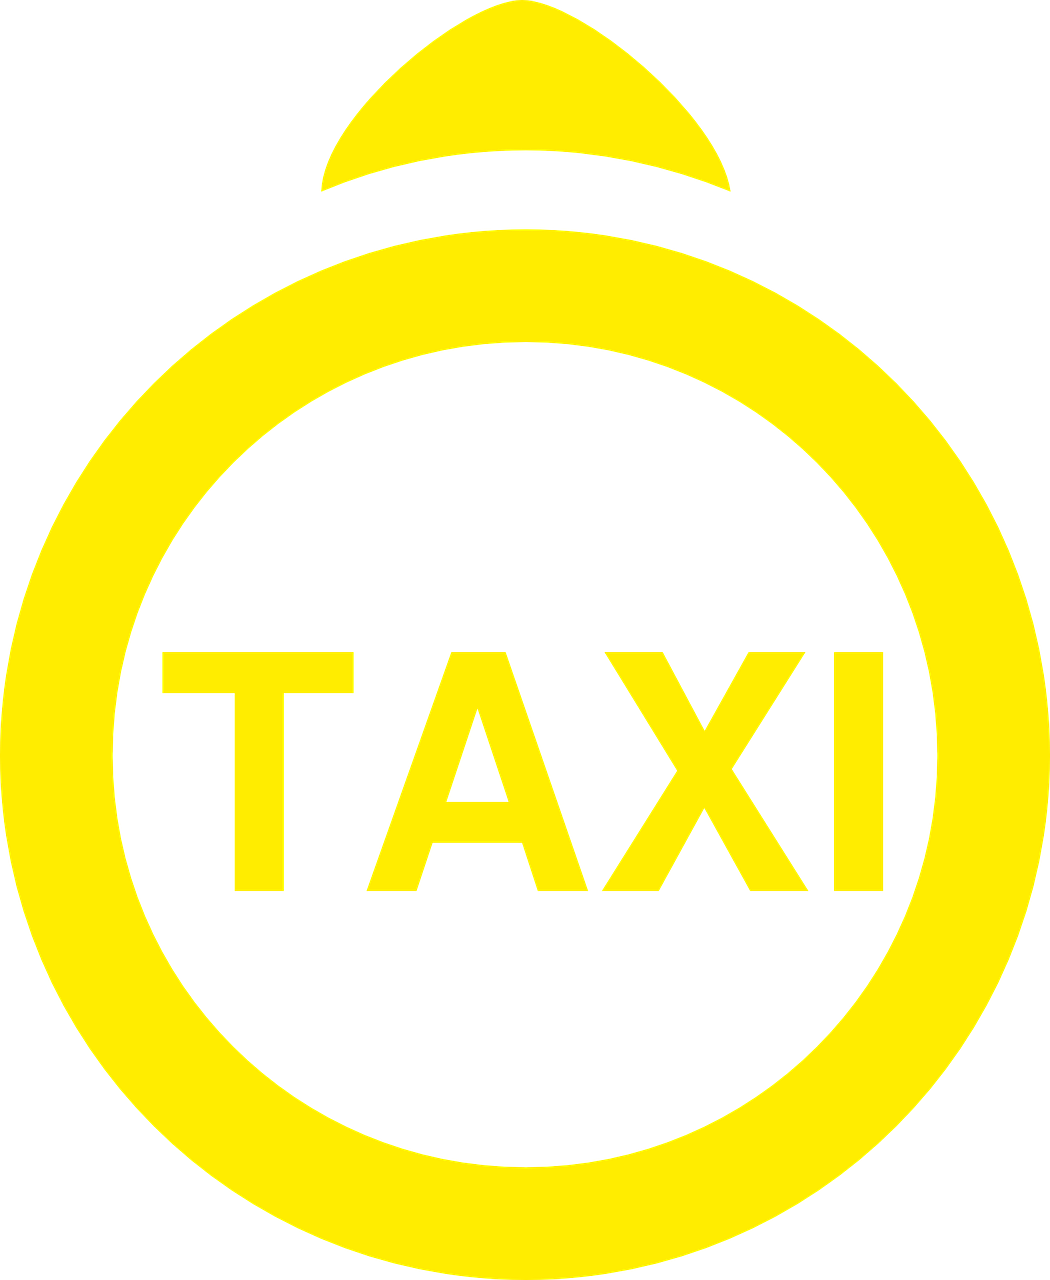 taxi designation of the information free photo